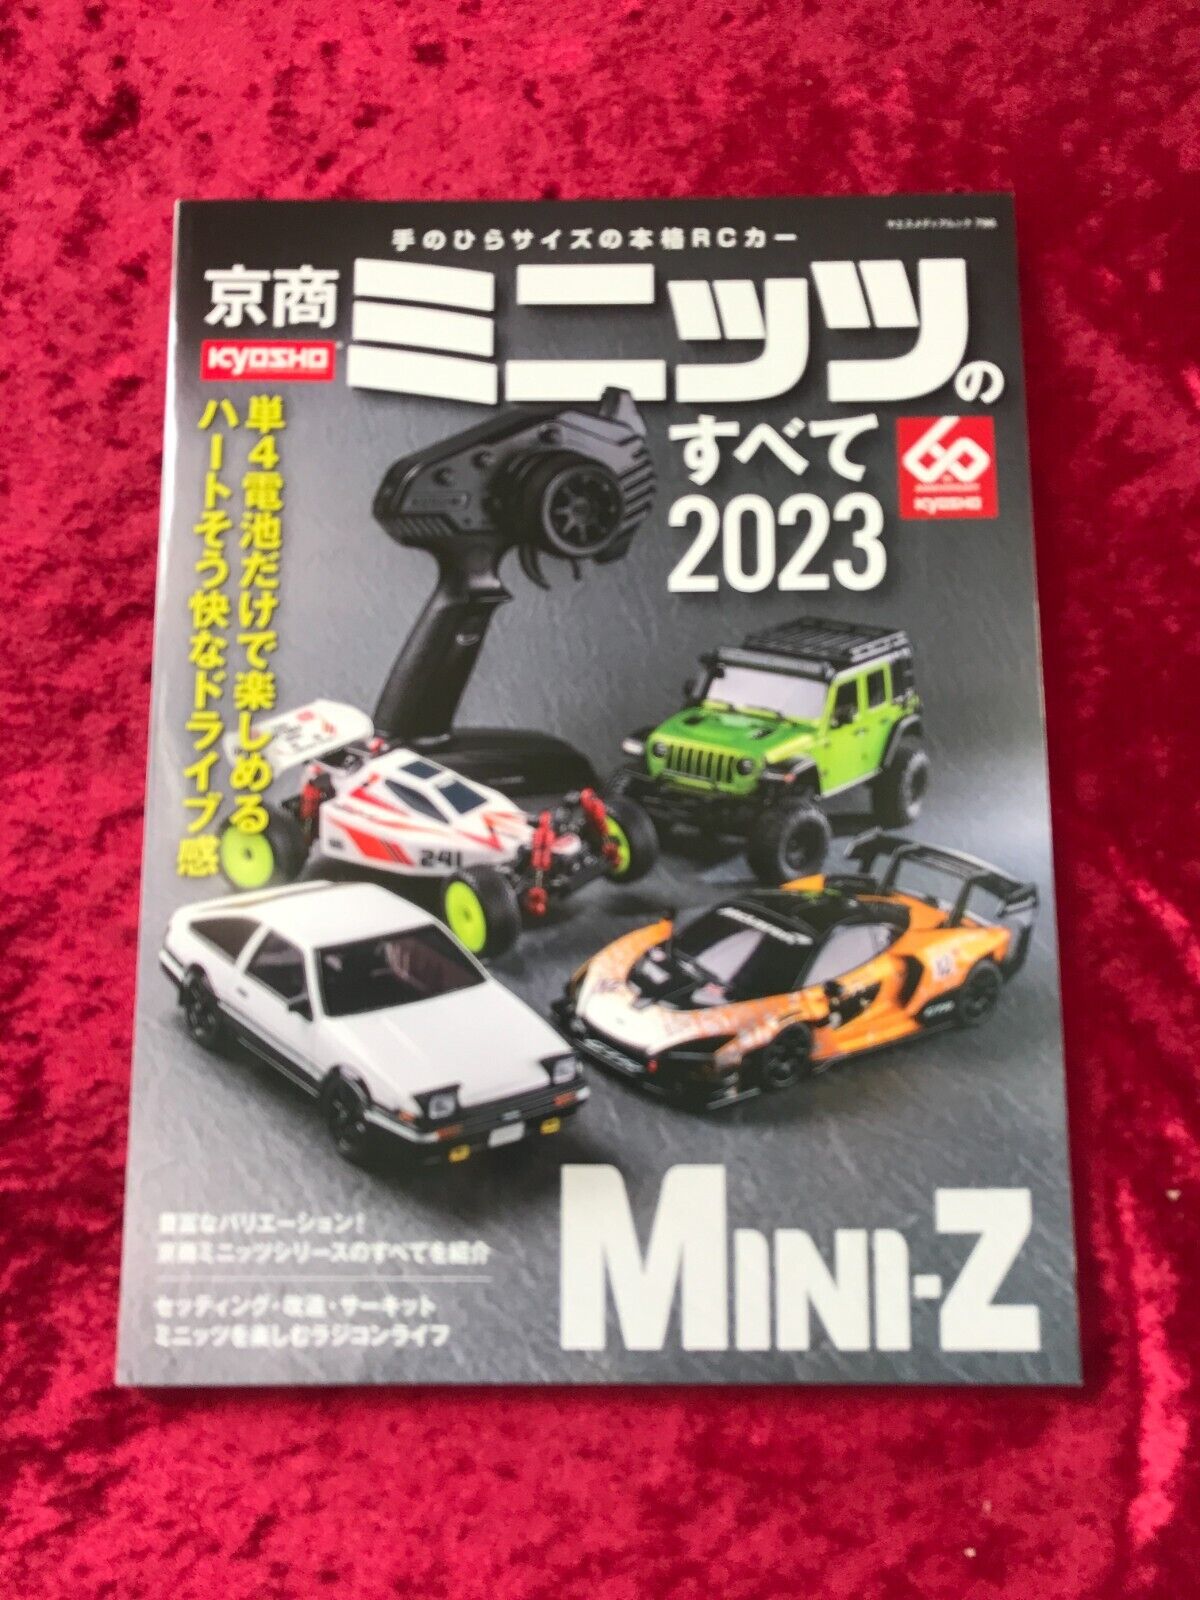 All about Kyosho MINI-Z 2023 guide setting RC car Japanese Book Japan